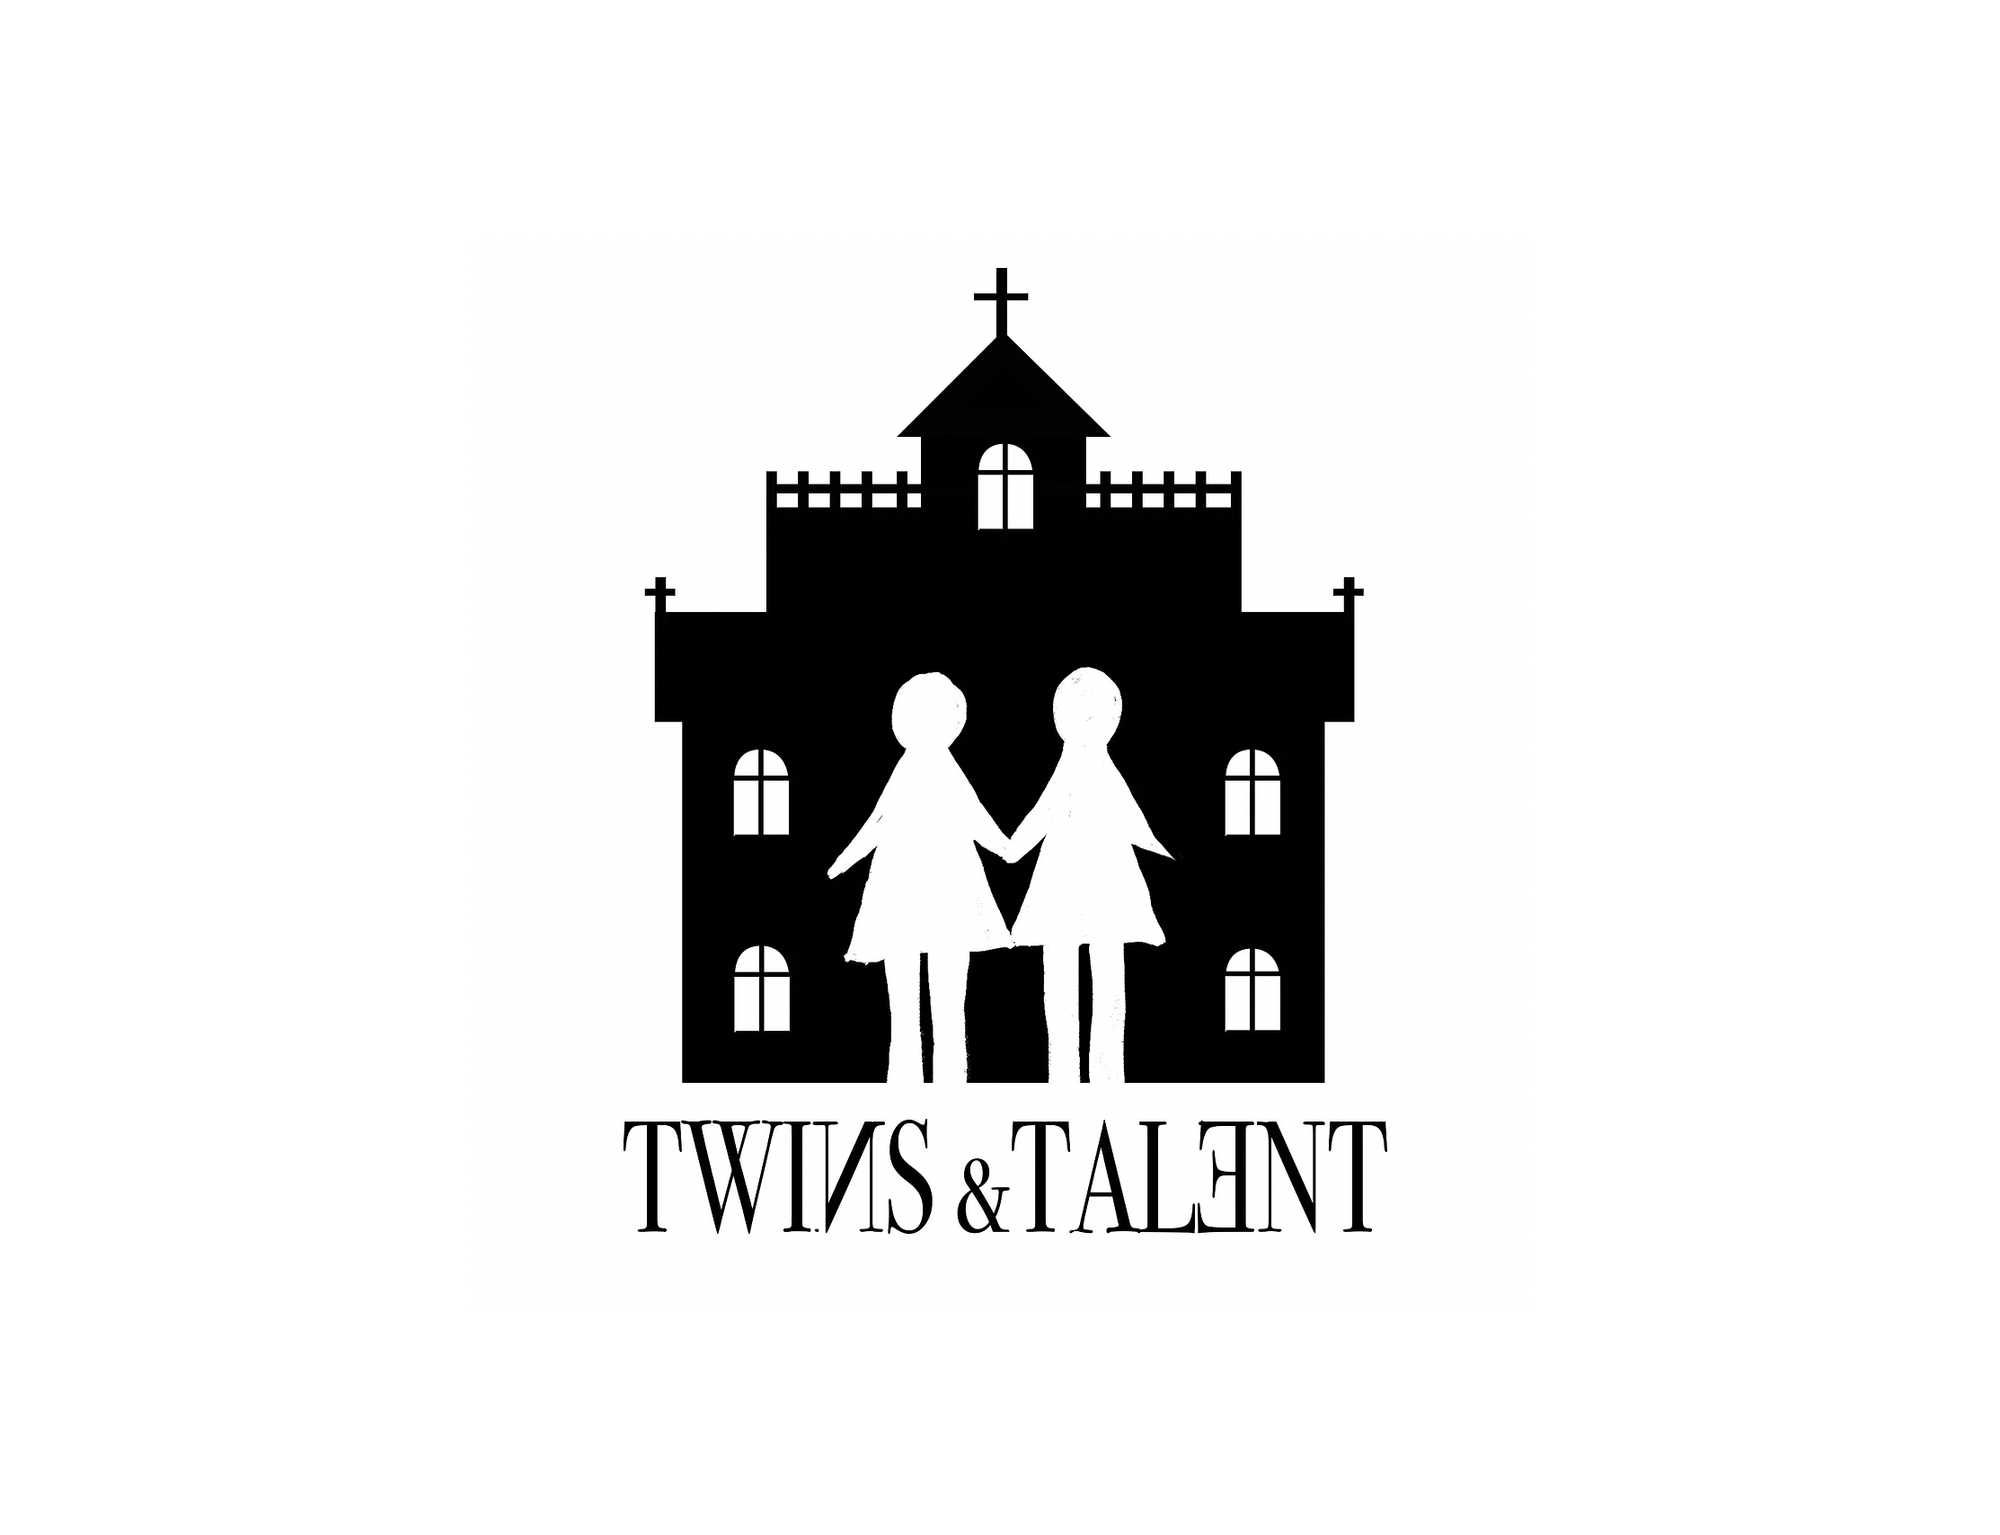 Take Your Latest Book to the Next Level - Twins & Talent